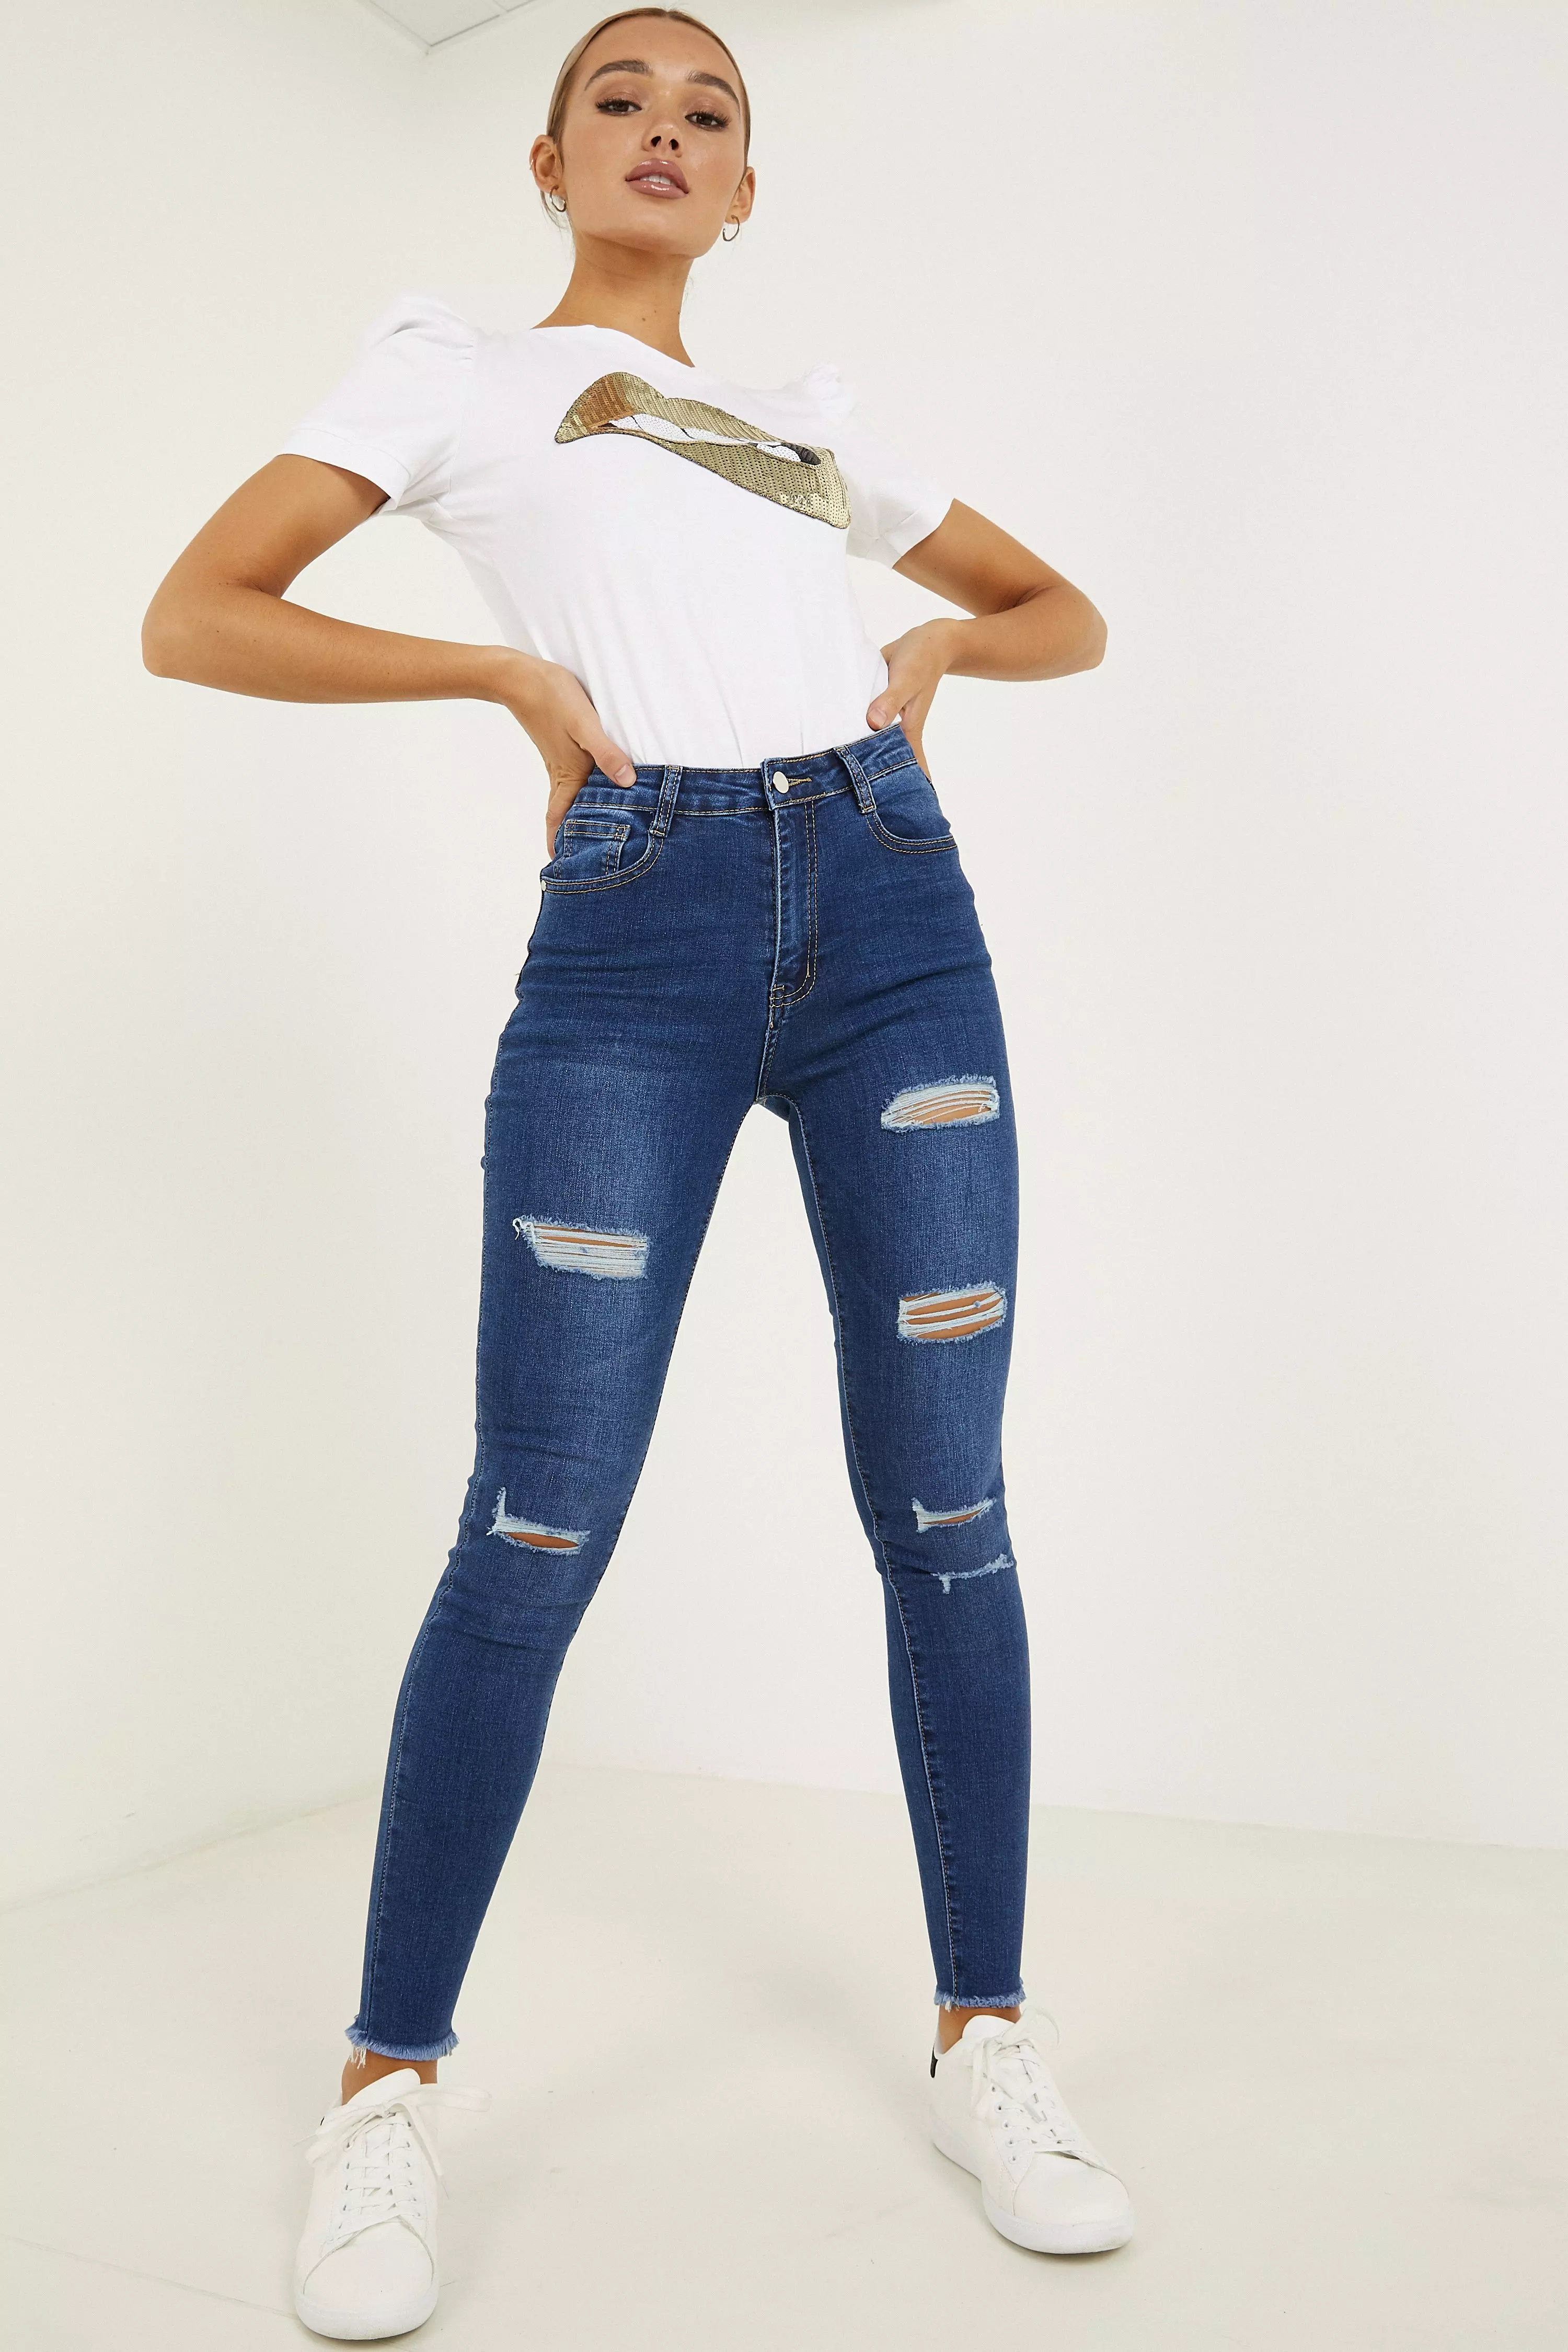 Blue Ripped Skinny Jeans - Quiz Clothing